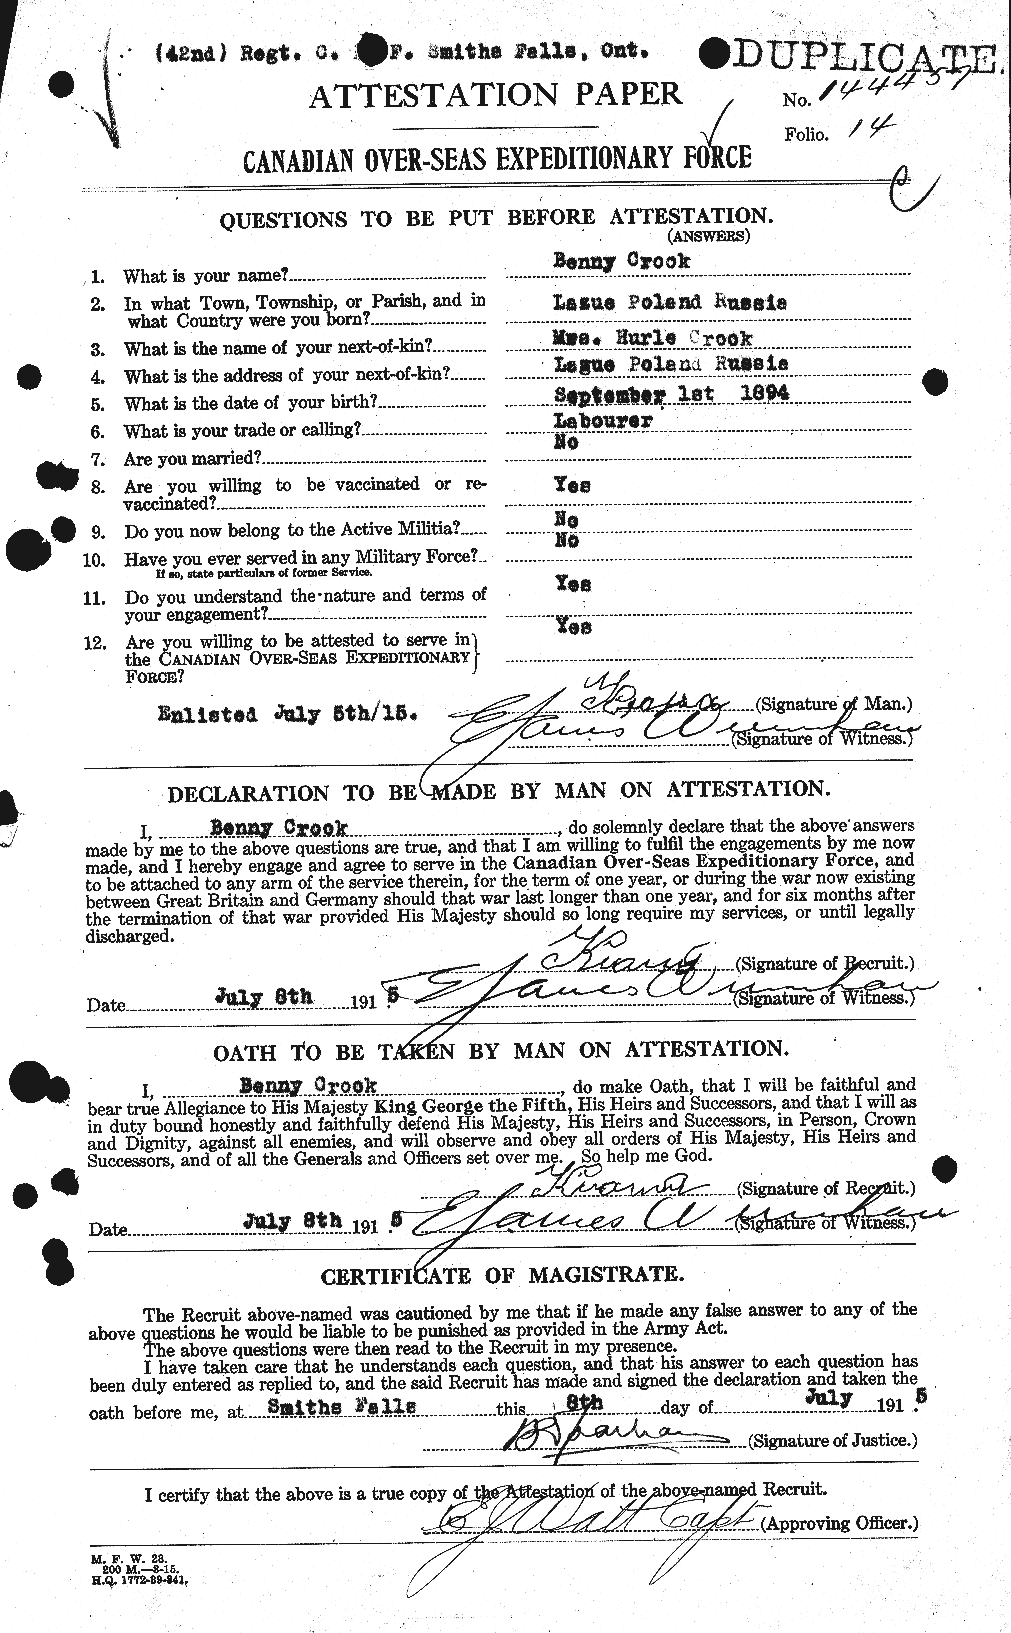 Personnel Records of the First World War - CEF 067244a